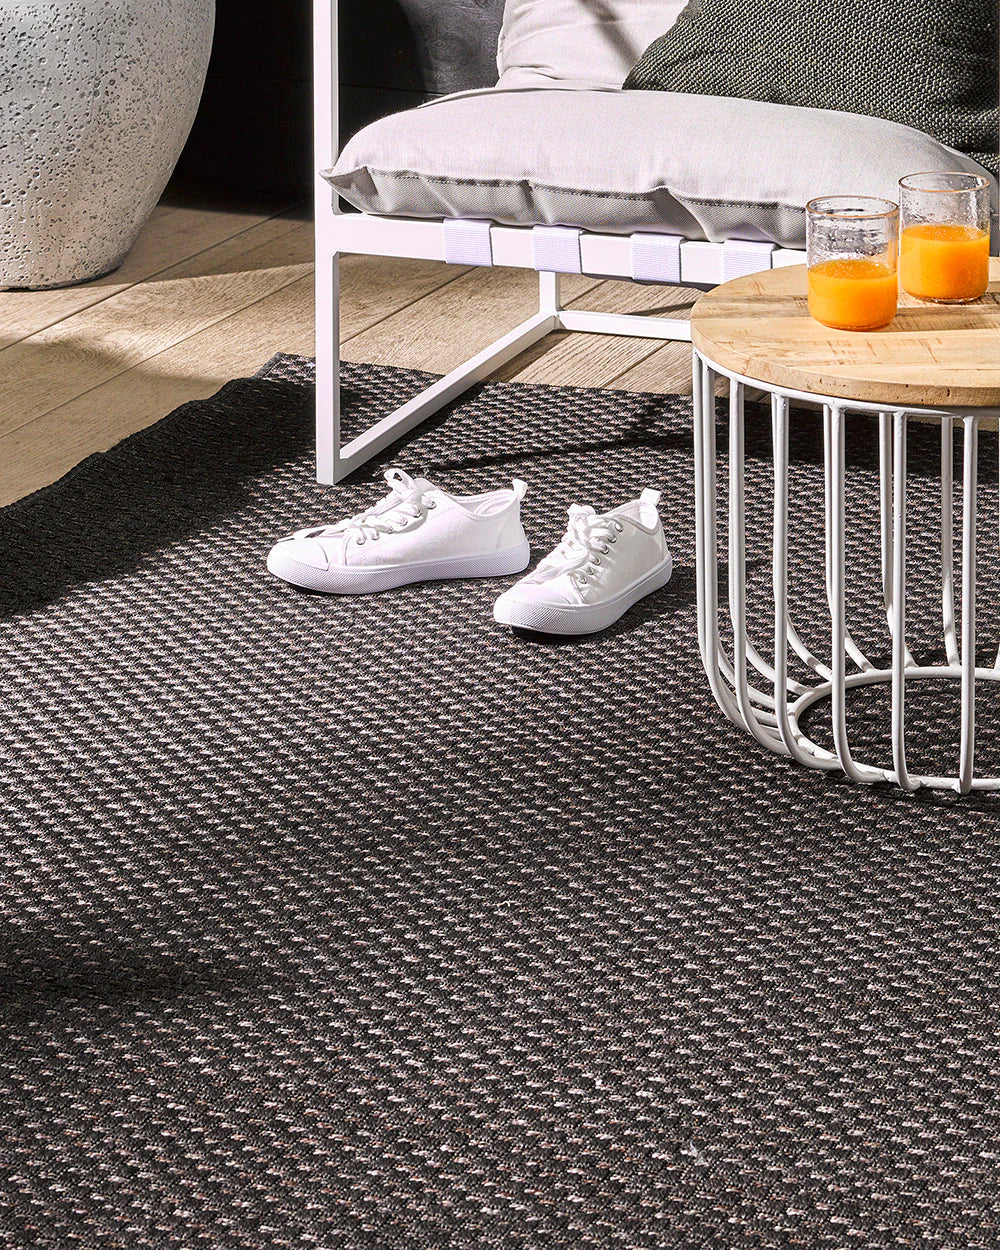 Flax Charcoal Outdoor Floor Rug from Baya Furtex Stockist Make Your House A Home, Furniture Store Bendigo. Free Australia Wide Delivery.